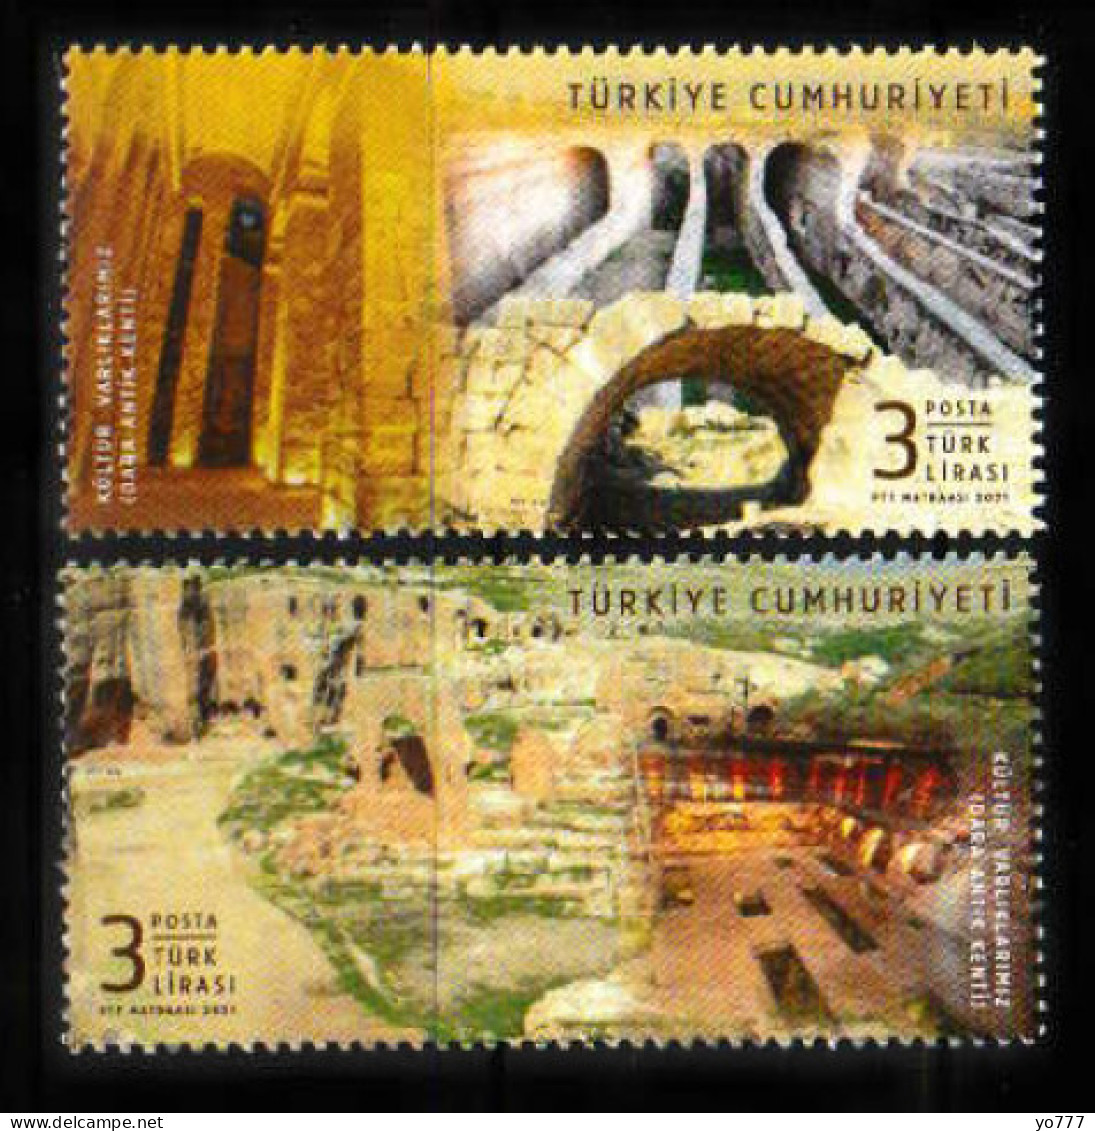 (4547-48) OUR CULTURAL ASSETS (ANCIENT CITY OF DARA) MNH** - Unused Stamps